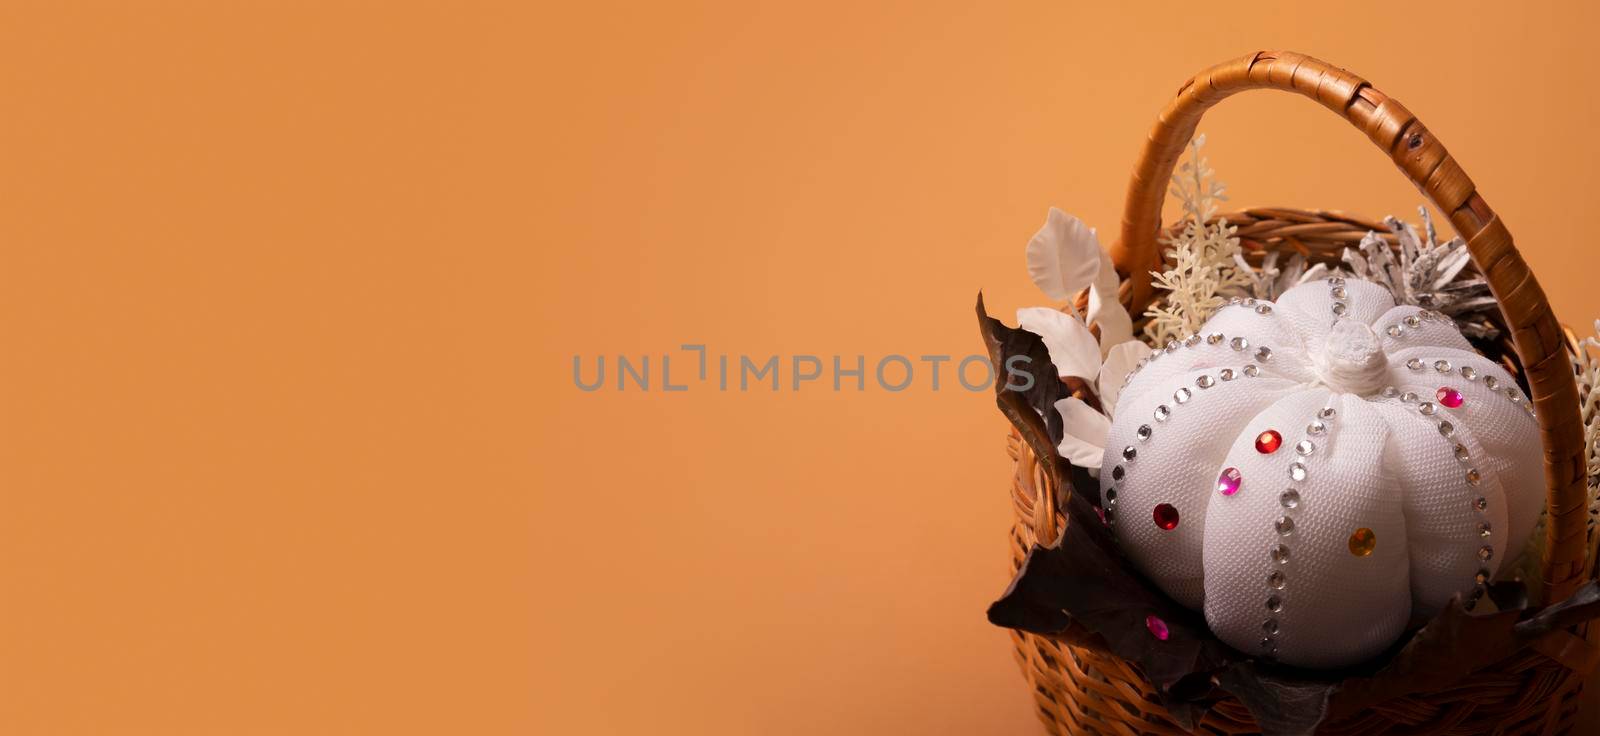 Banner with white decorative hand made pumpkin with shiny stones and fall leaves in basket on colored background. Autumn harvest concept.